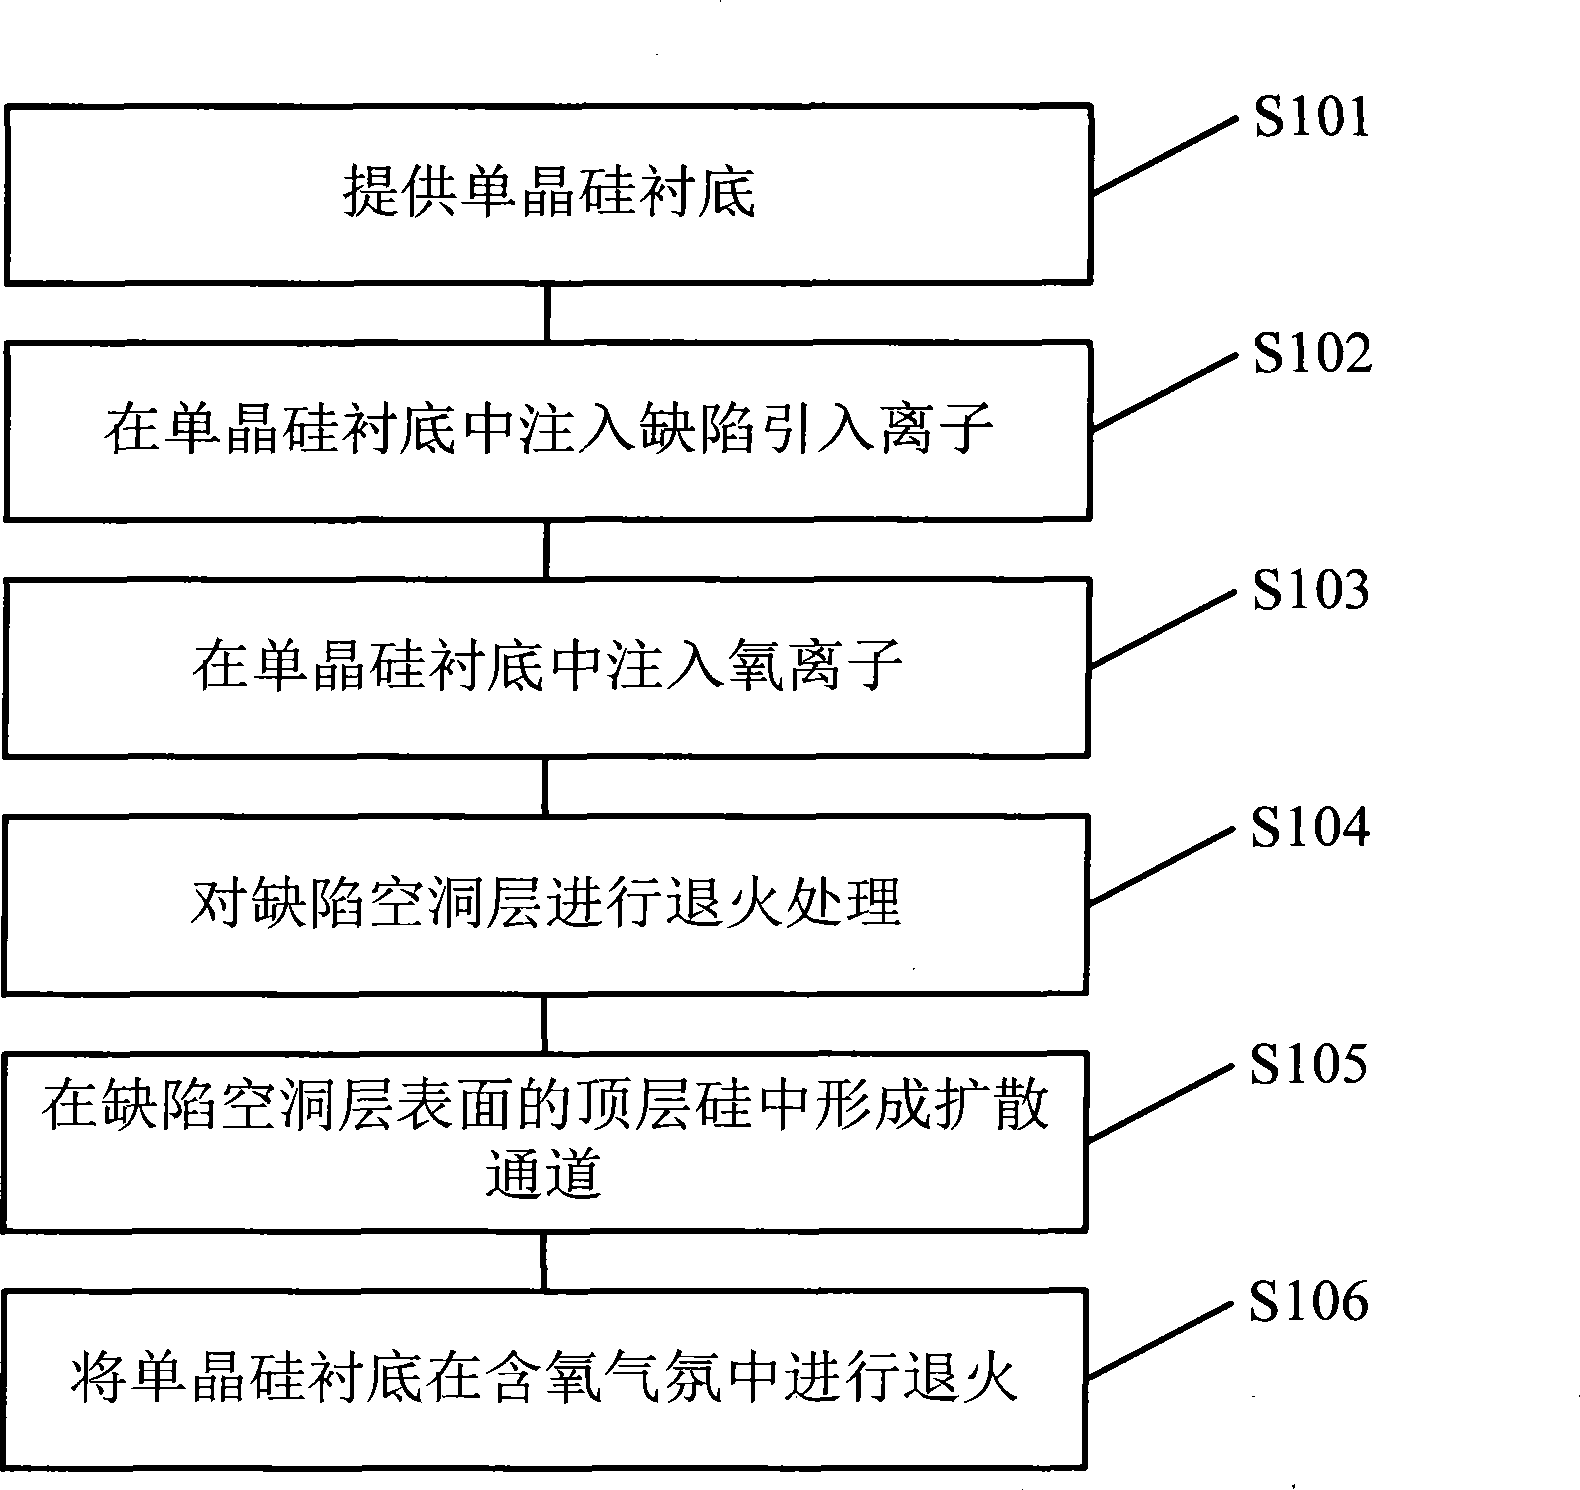 Internal heating oxidation method for preparing silicon material on isolator